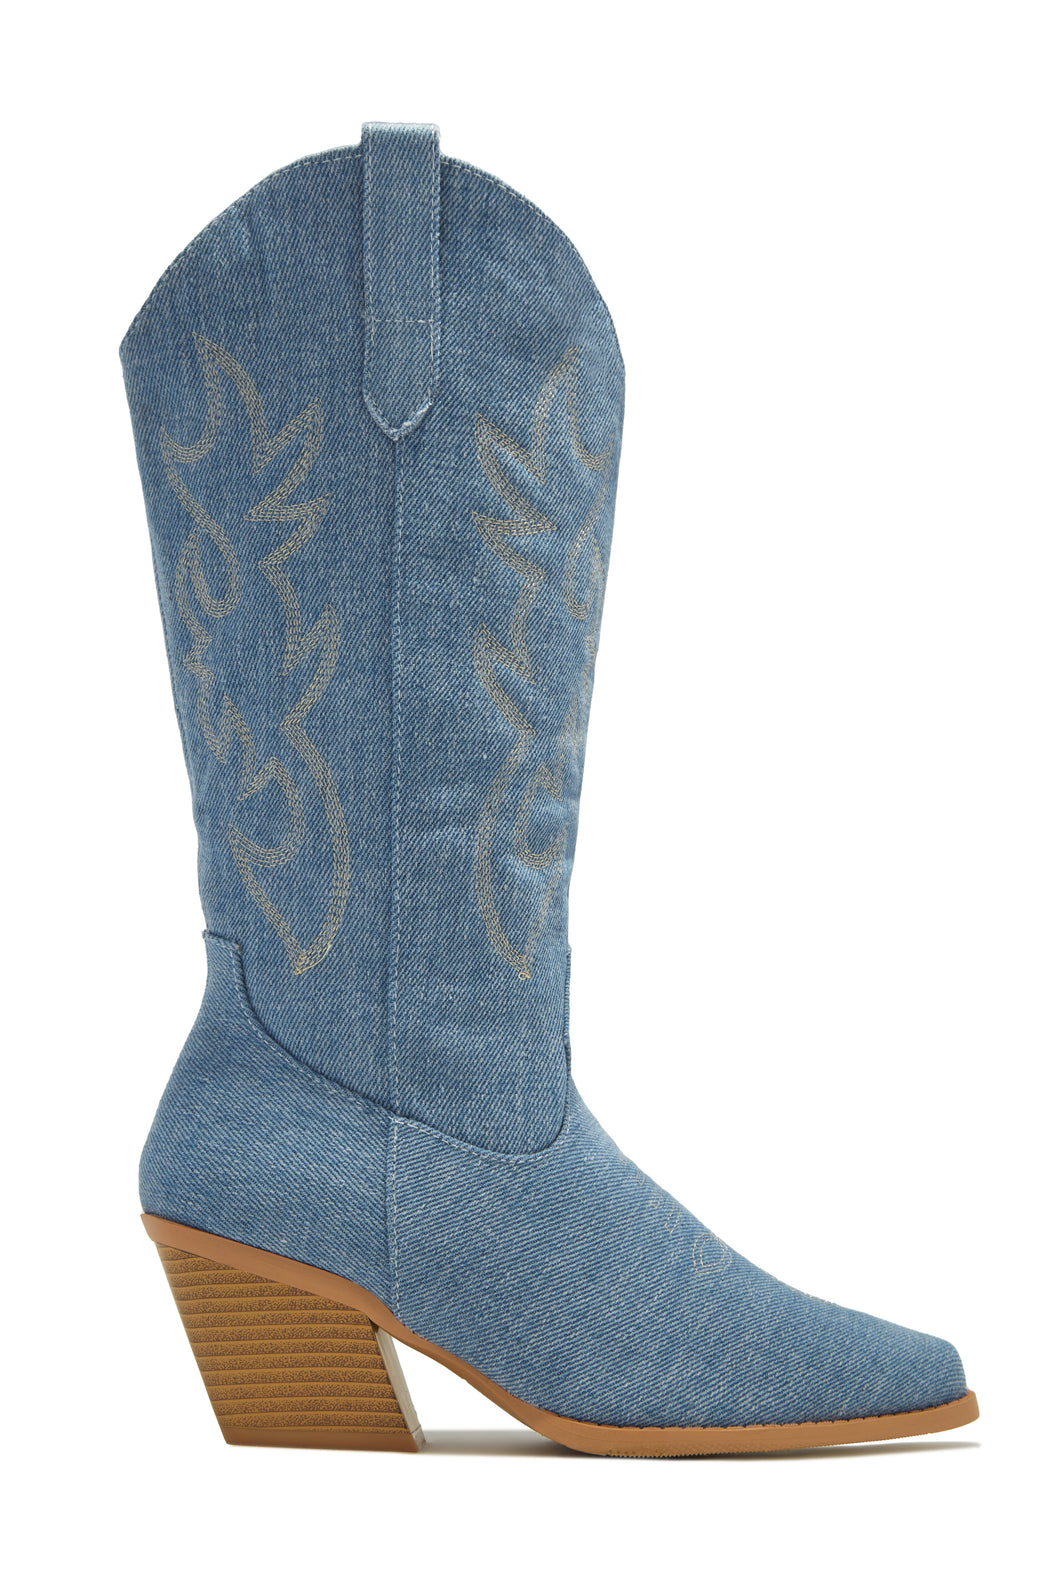 Denim Pointed Toe Boots